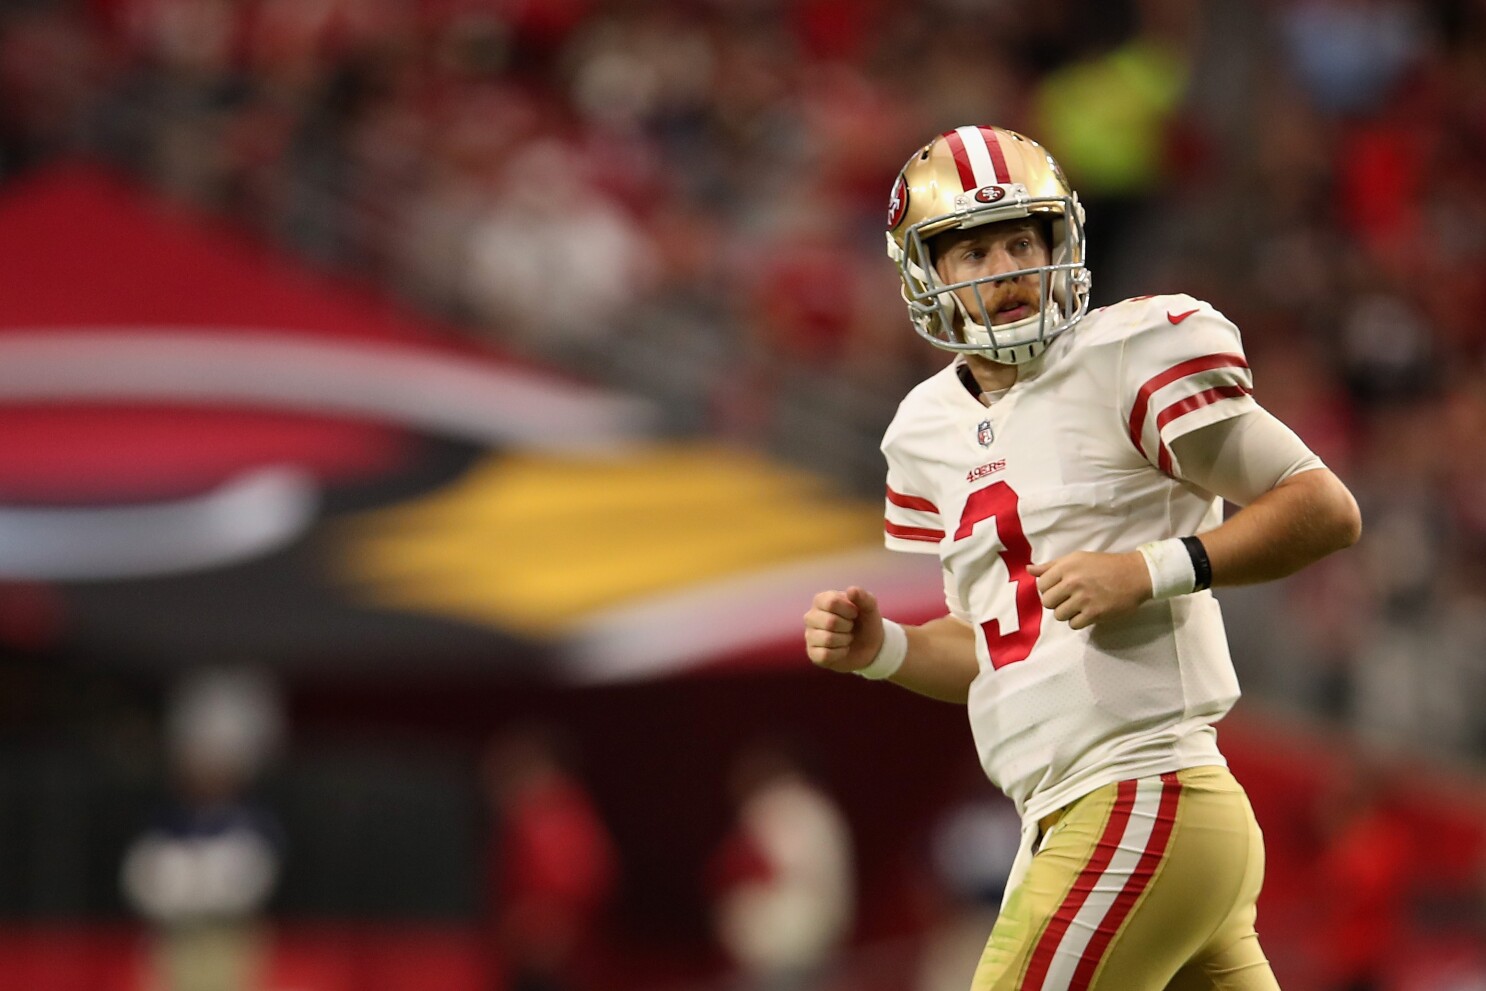 Brother Of 49ers C J Beathard Killed Outside Bar In Nashville Los Angeles Times